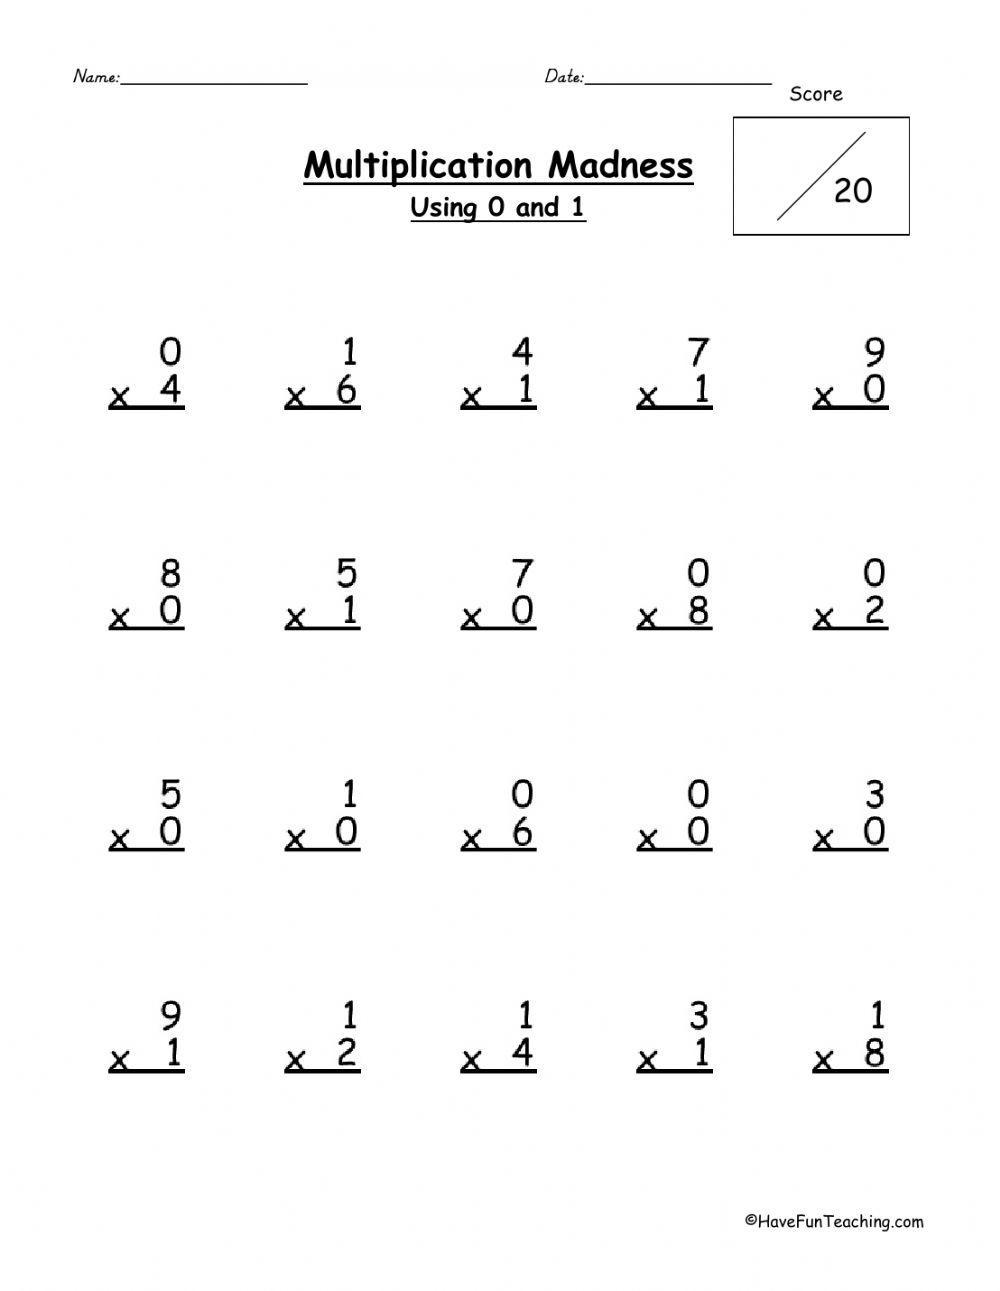 Multiplication Facts 0 & 1